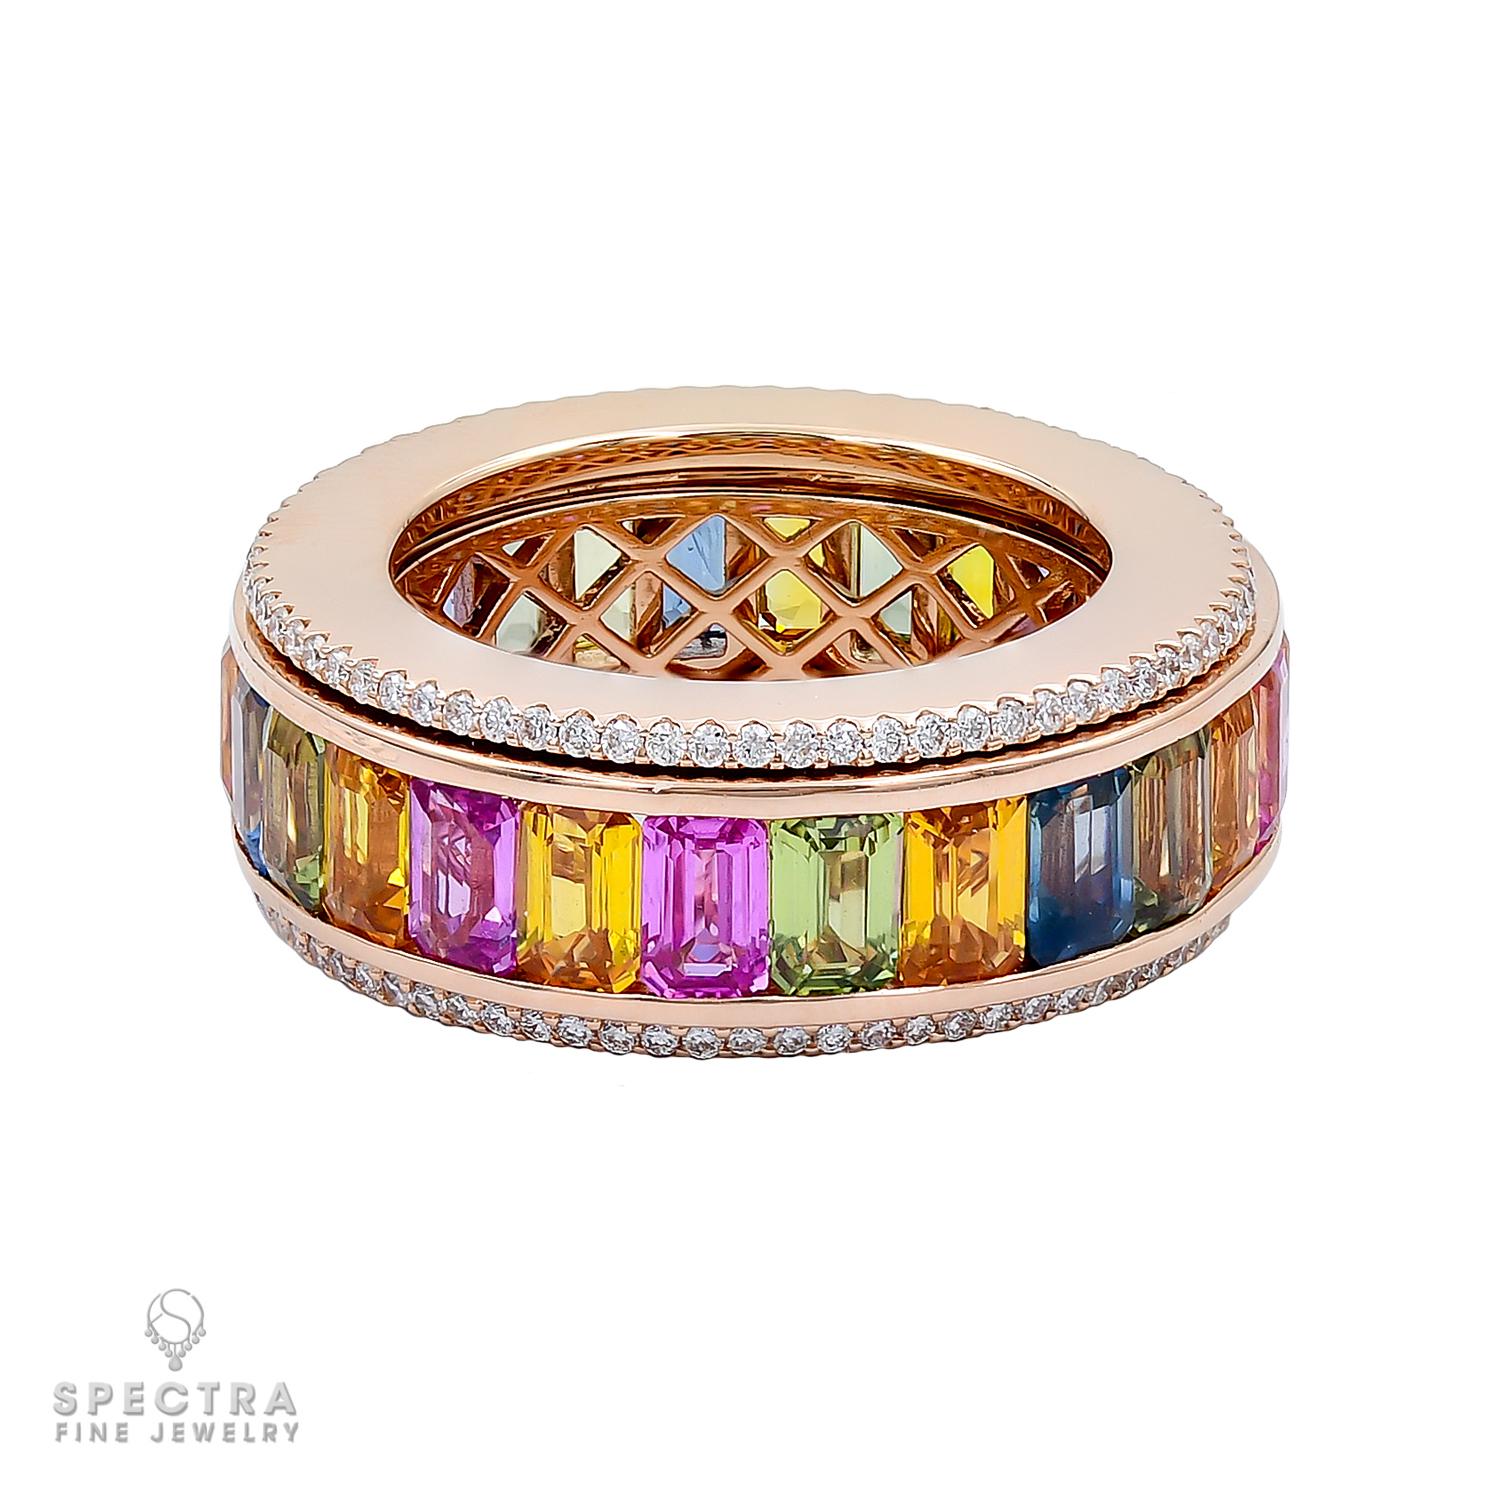 A band ring featuring a spinning center, set with 26 emerald-cut multicolored sapphires weighing a total of 8.79 carats. Smaller model.
21 multi-color sapphires weighing a total of 7.03 carats.
5 pink sapphires weighing a total of 1.76 carats.
The